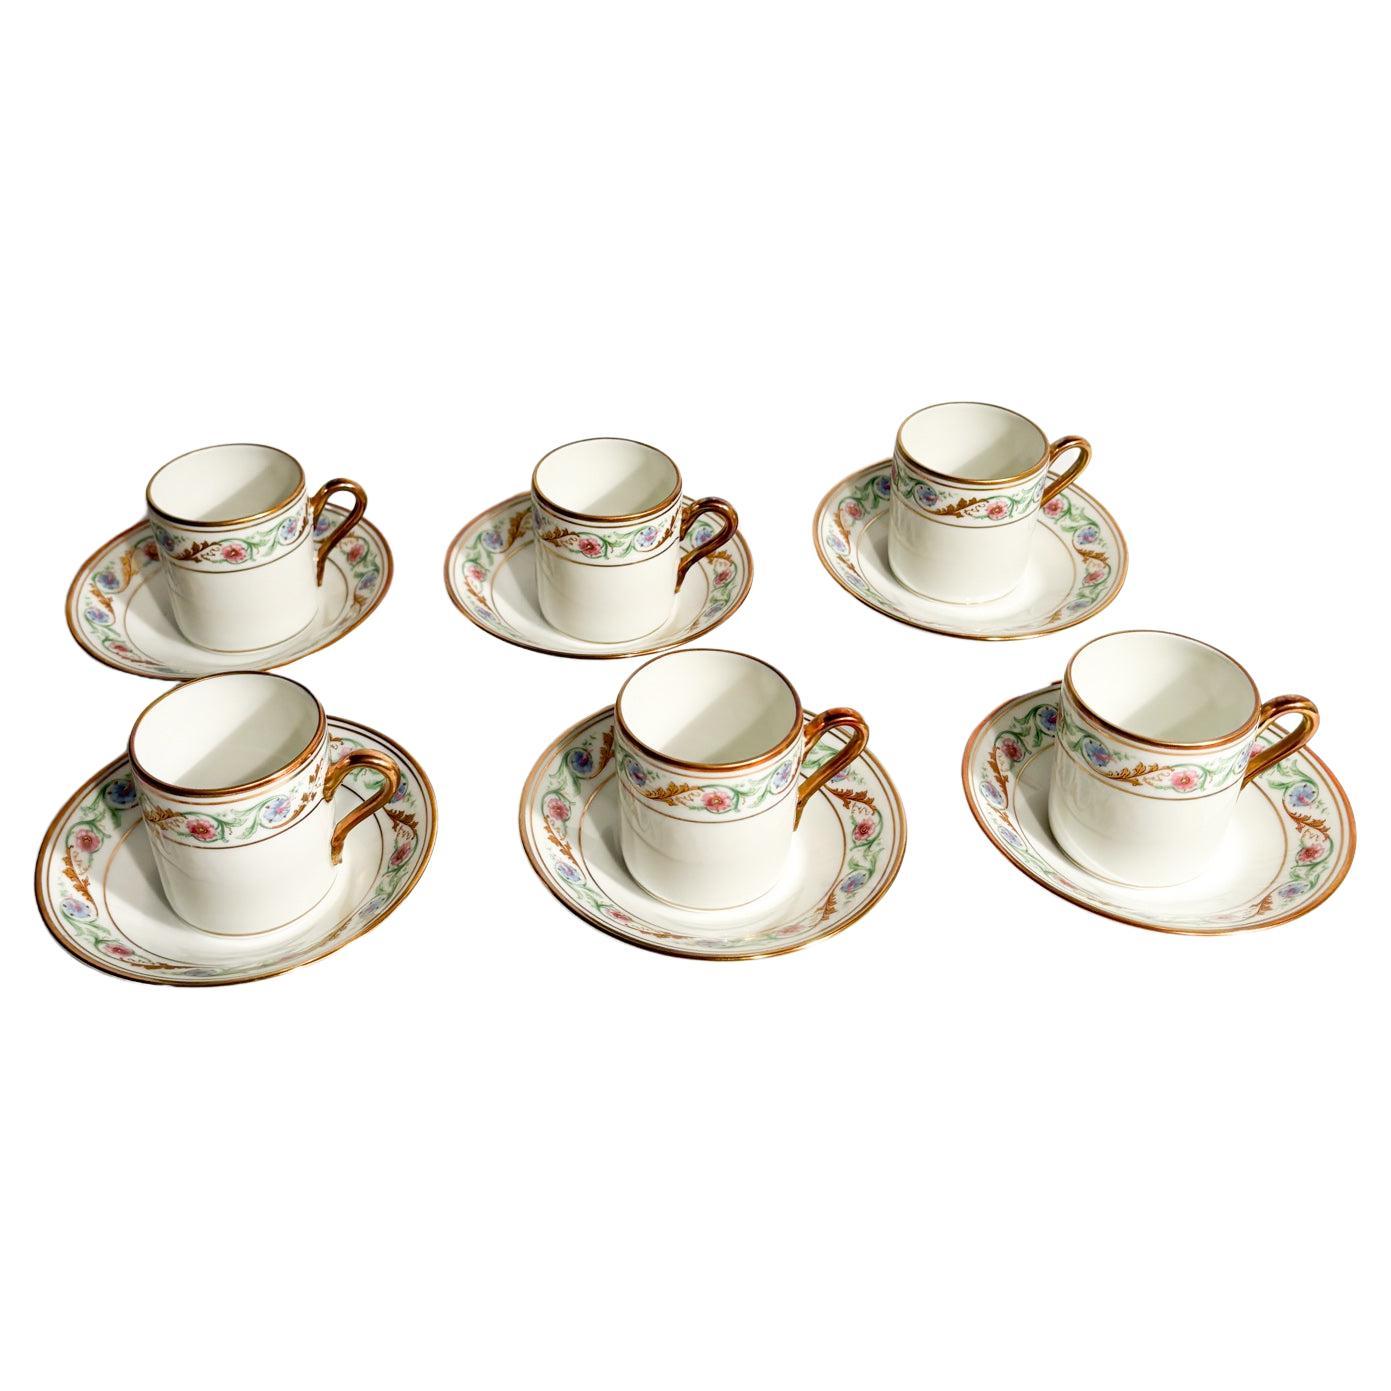 Set of Six Porcelain Coffee Cups by Ginori Doccia Pittoria from the 1940s For Sale